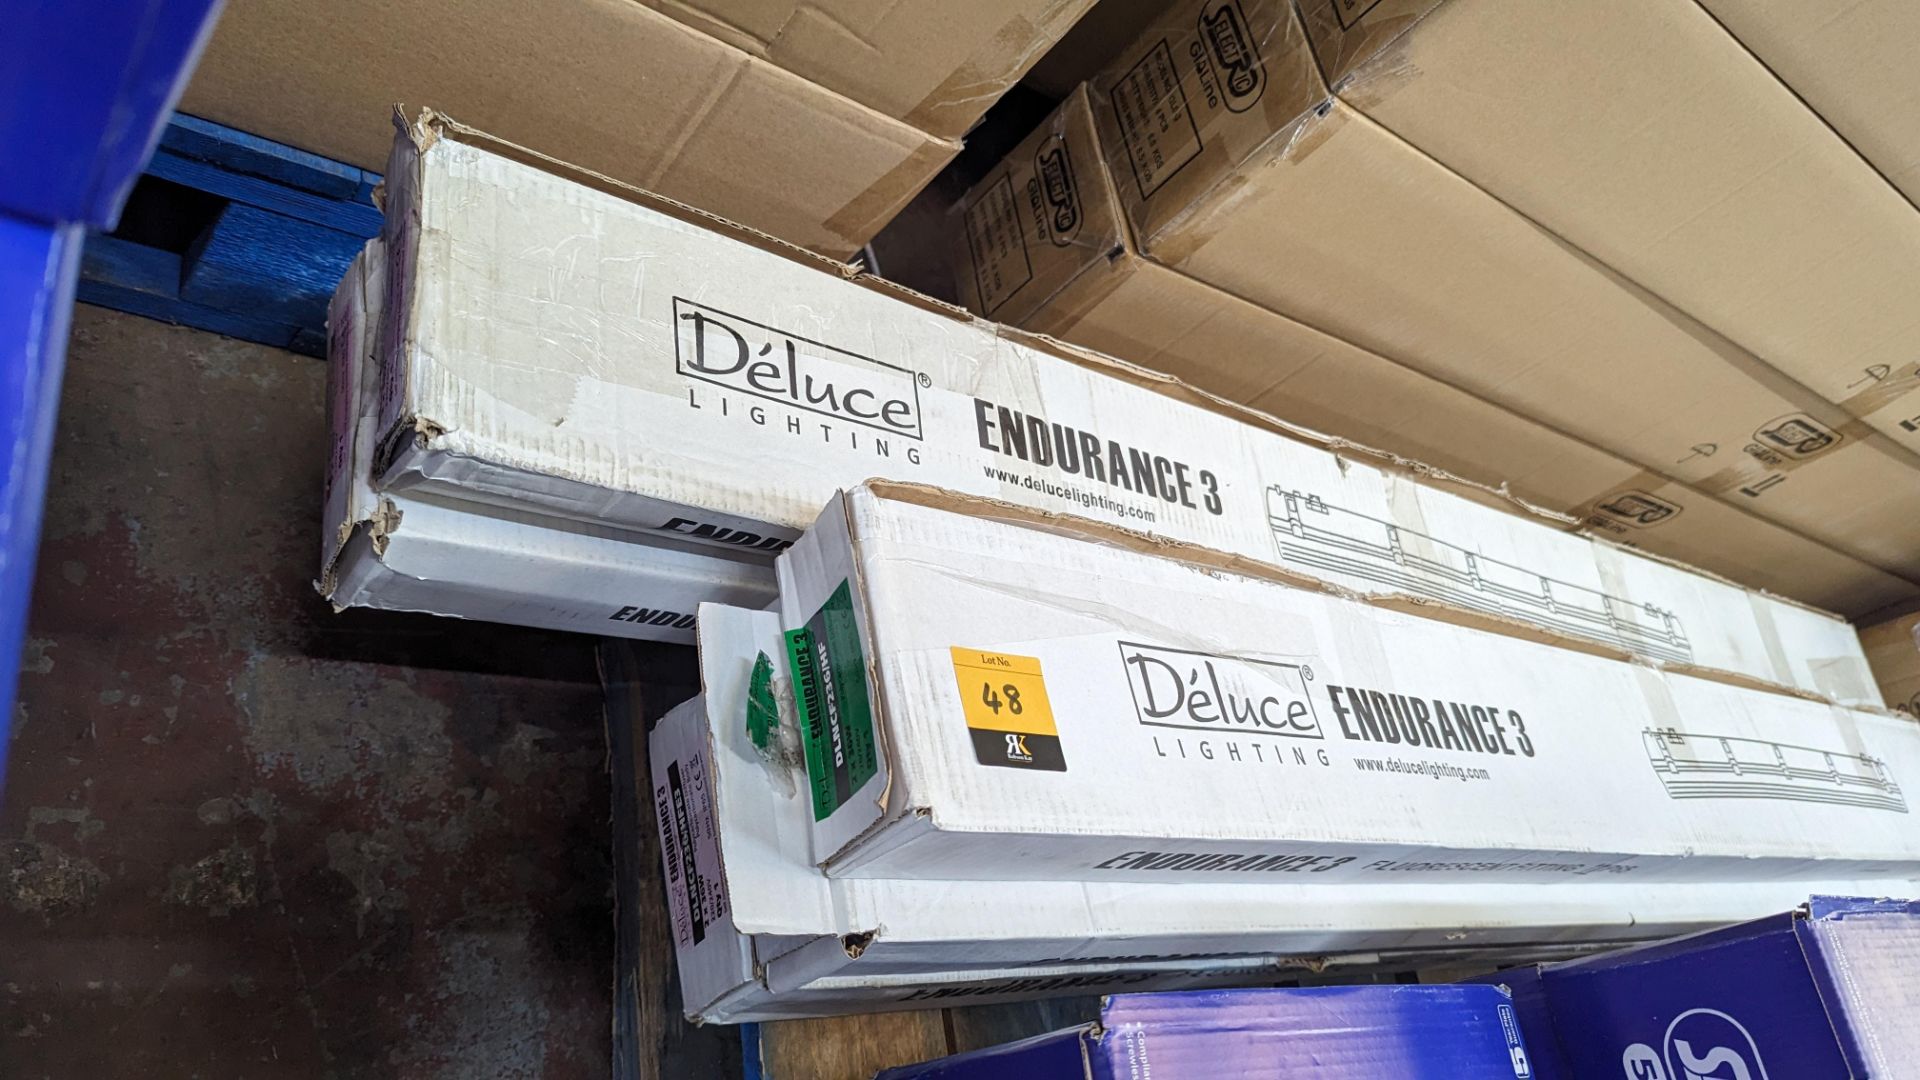 5 off Déluce Lighting Endurance 3 IP65 fluorescent fittings in 2 different lengths - Image 3 of 4